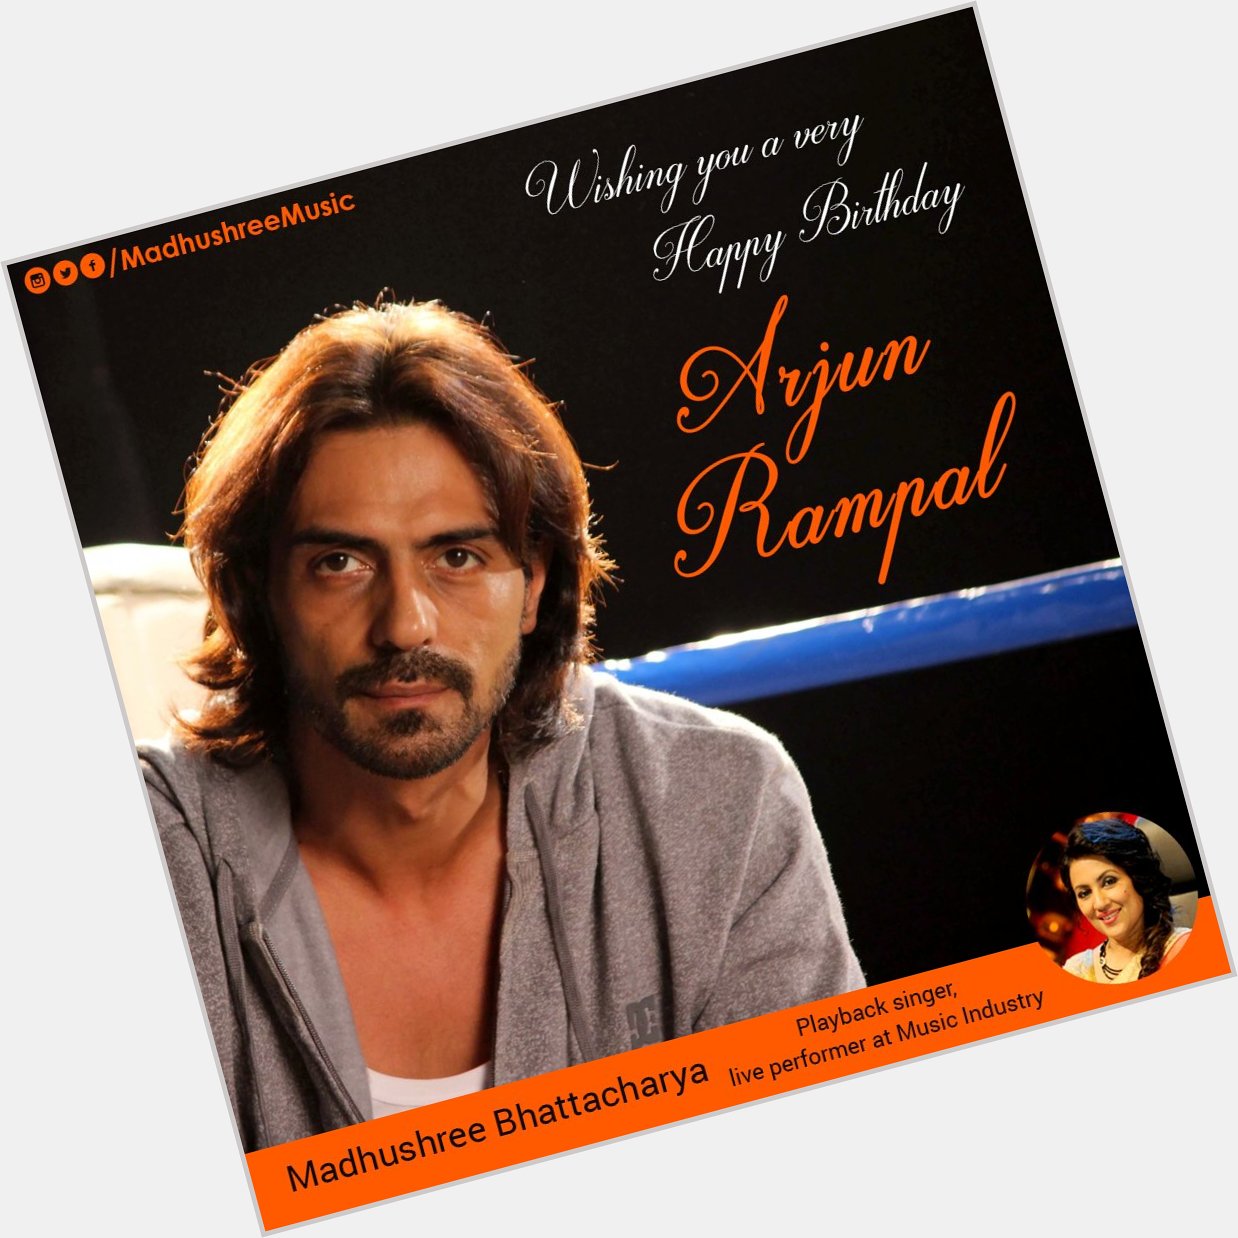 Wishing you a very Happy Birthday handsome and talented !
Happy Birthday Arjun Rampal 